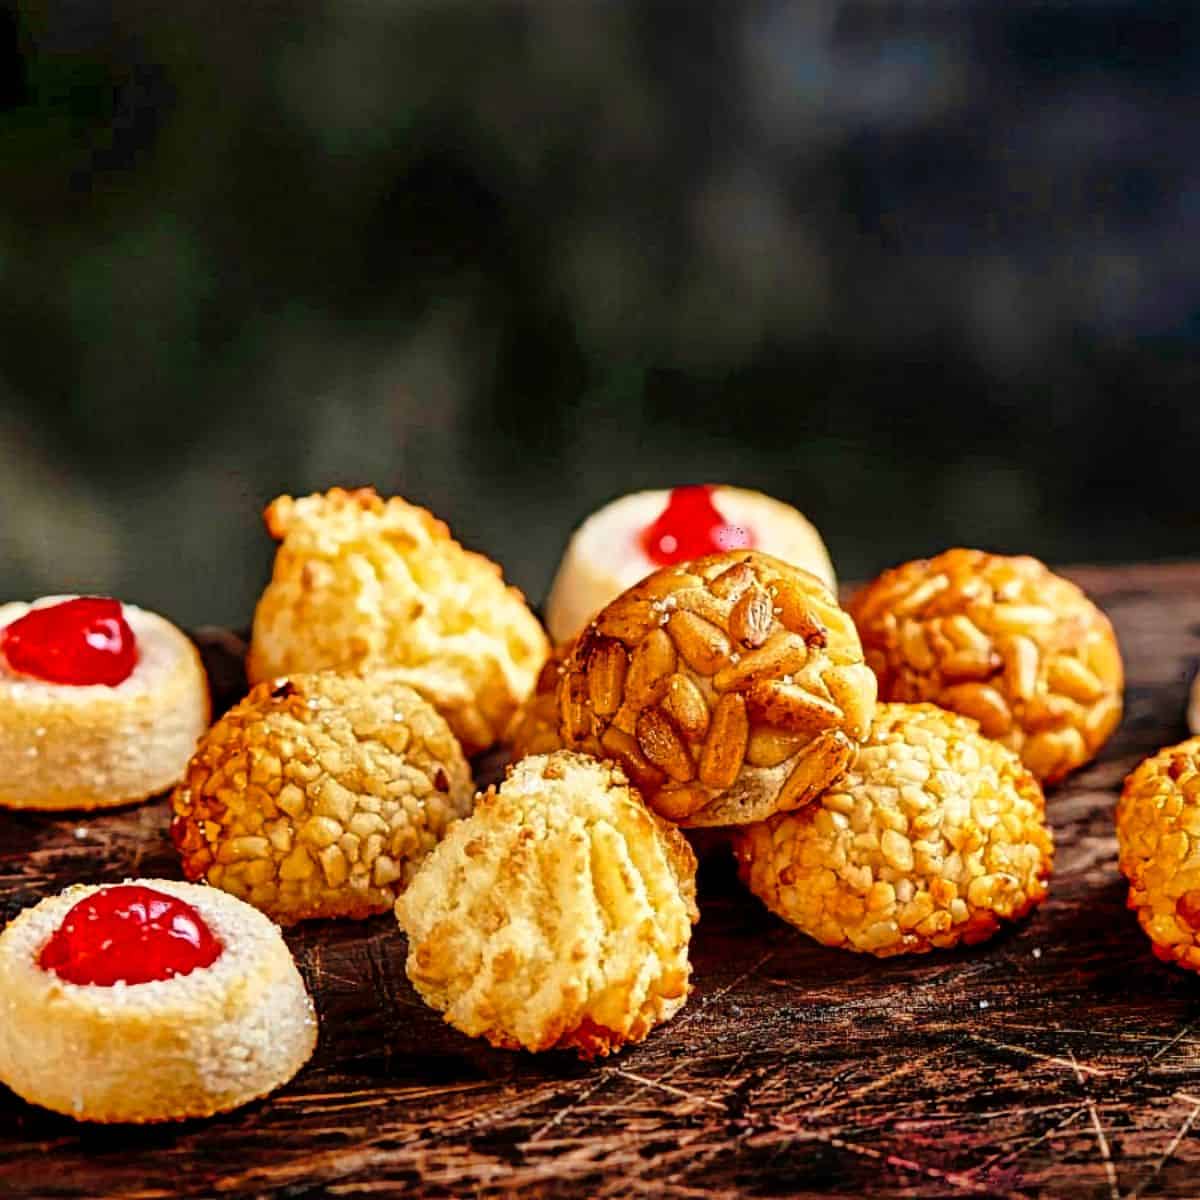 27. Panellets (Catalan Almond Sweets) Recipe